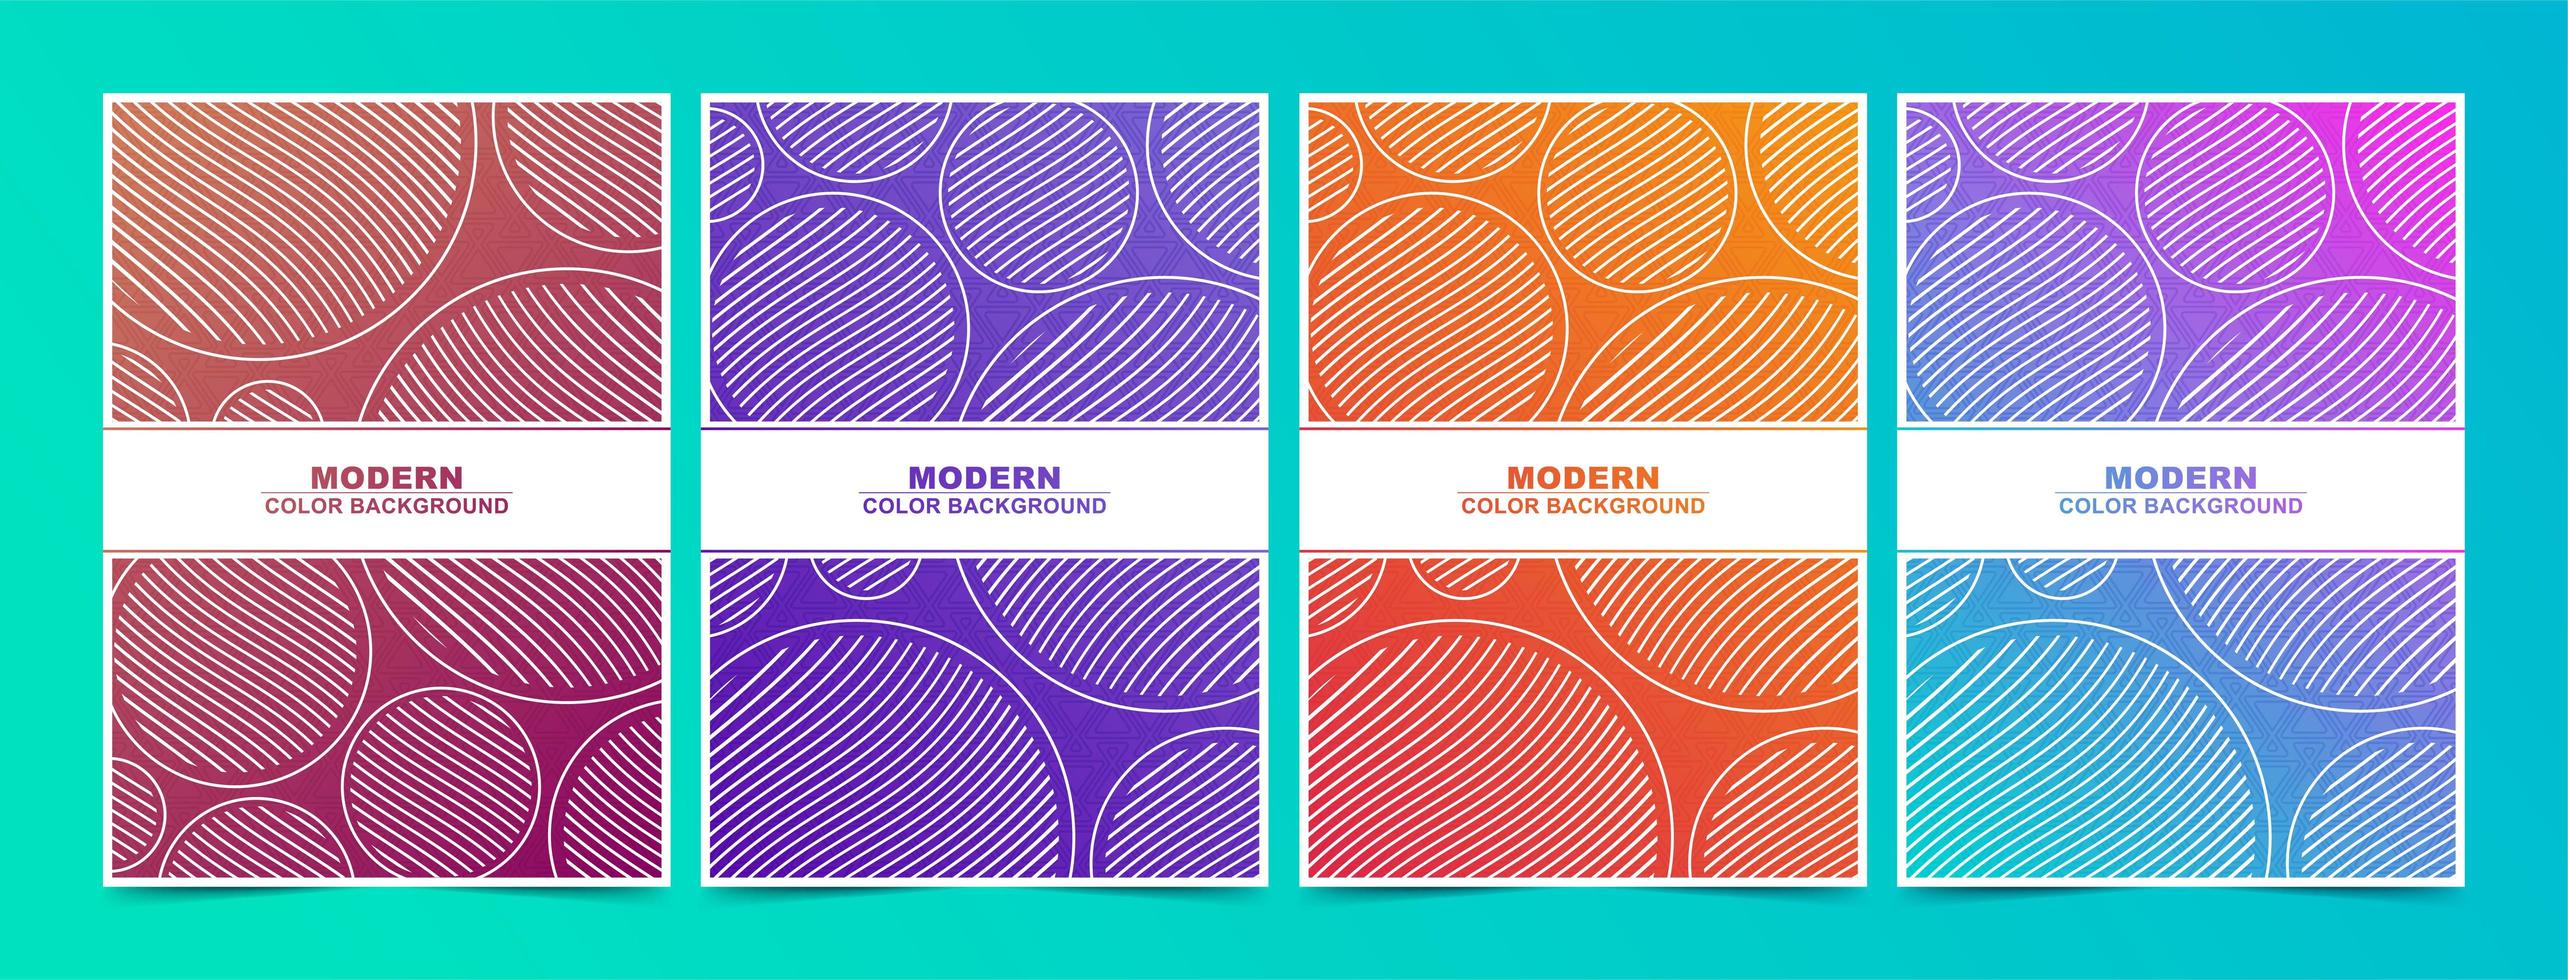 Set of Gradient Covers with Striped Circles vector